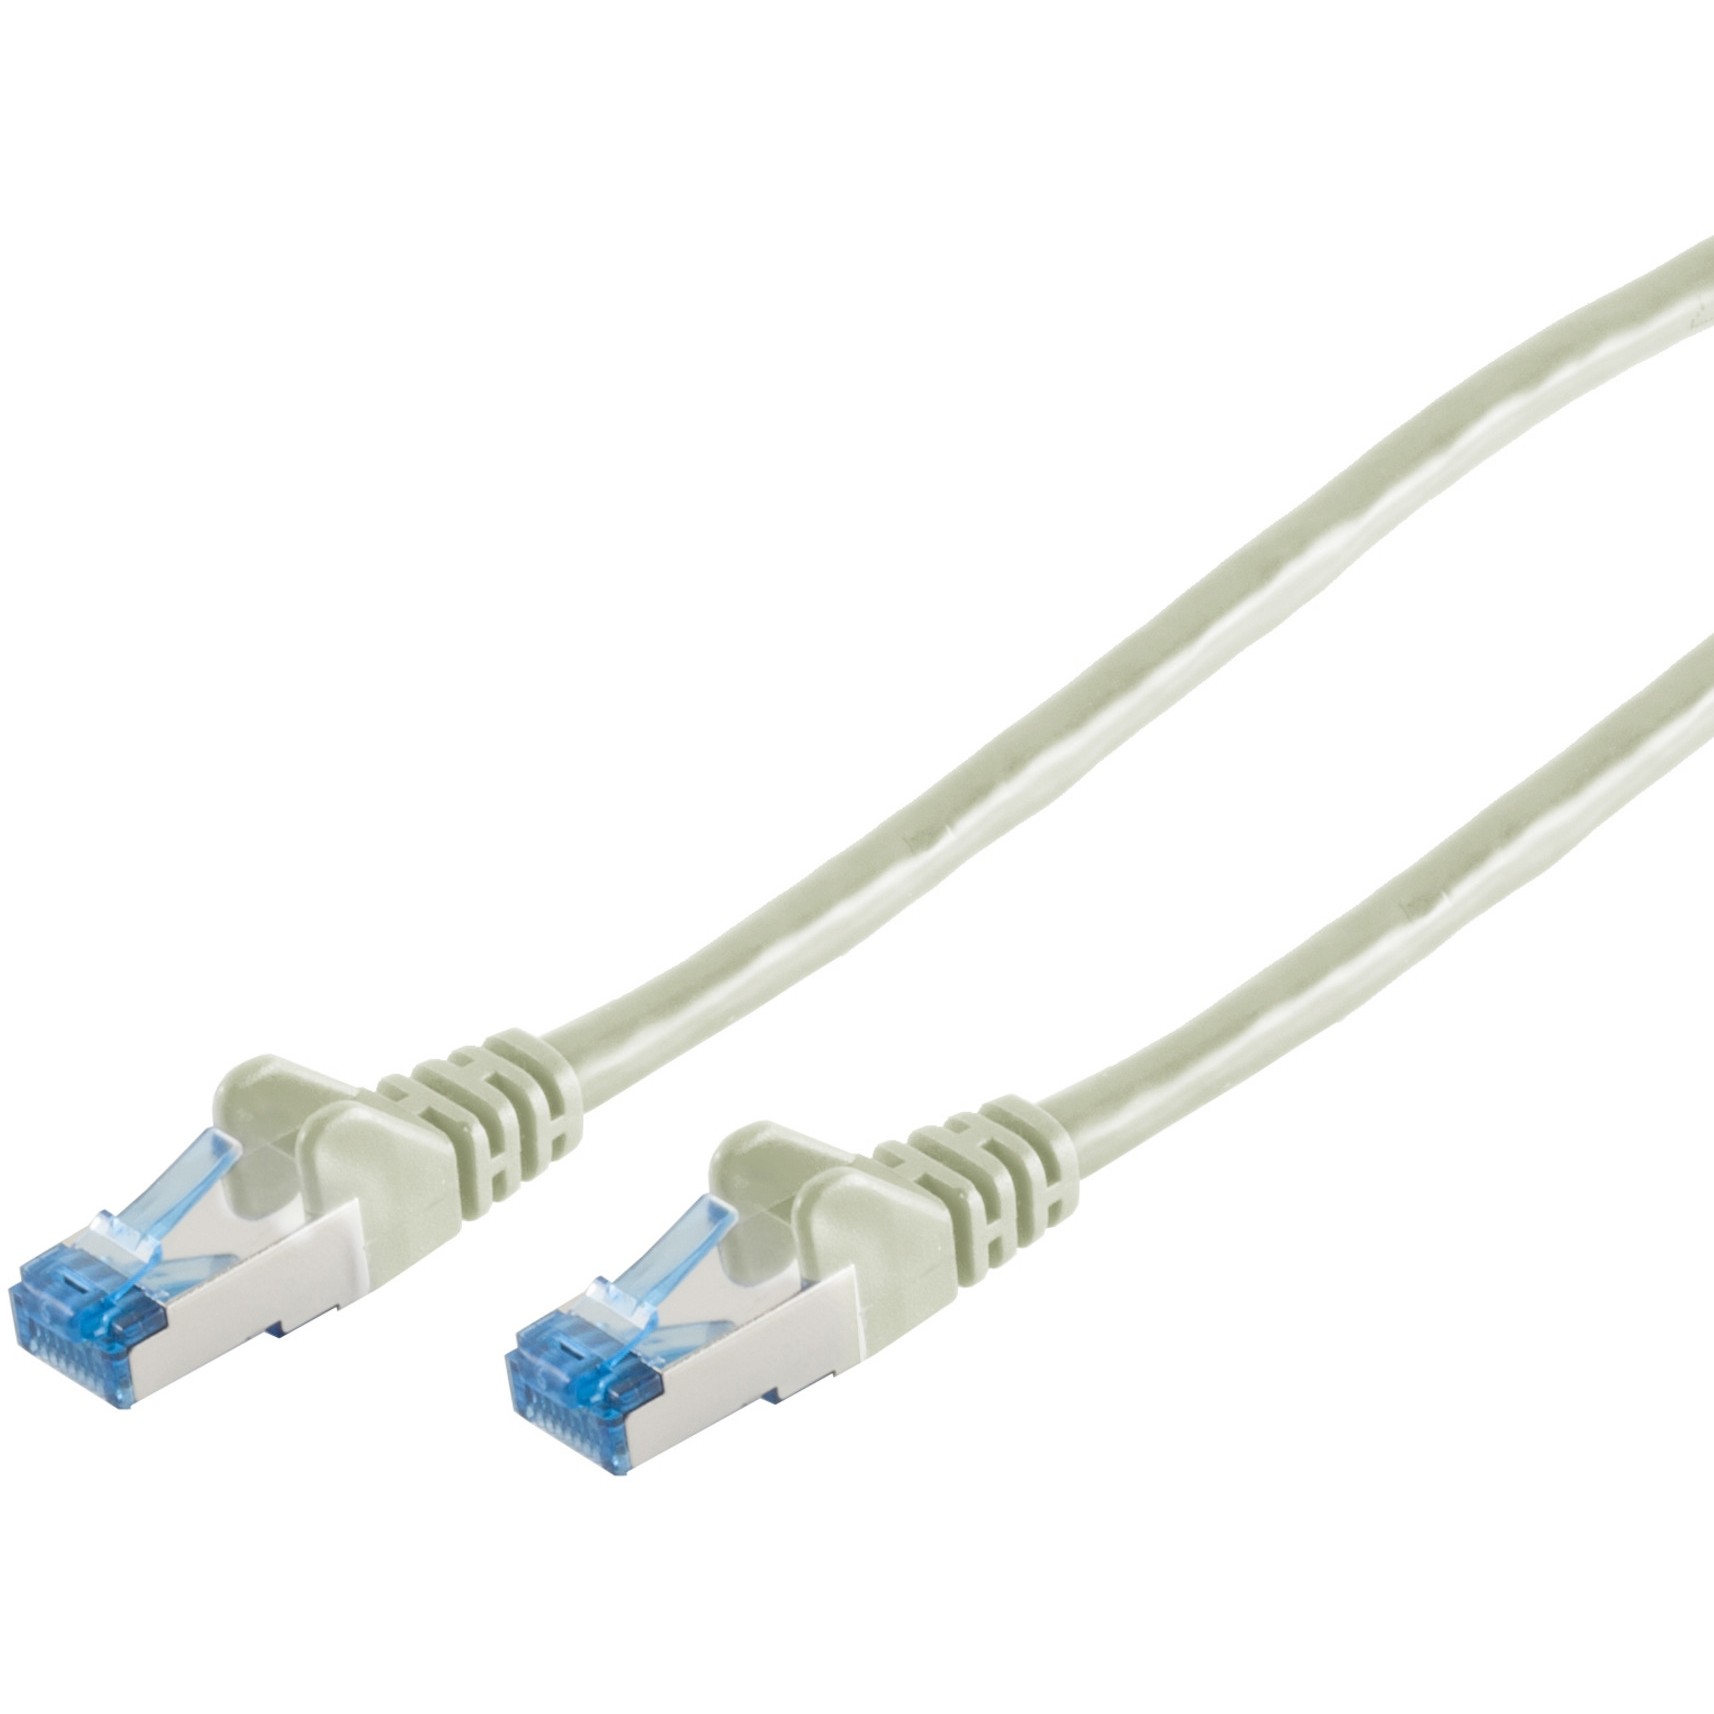 S-Conn 75715 networking cable